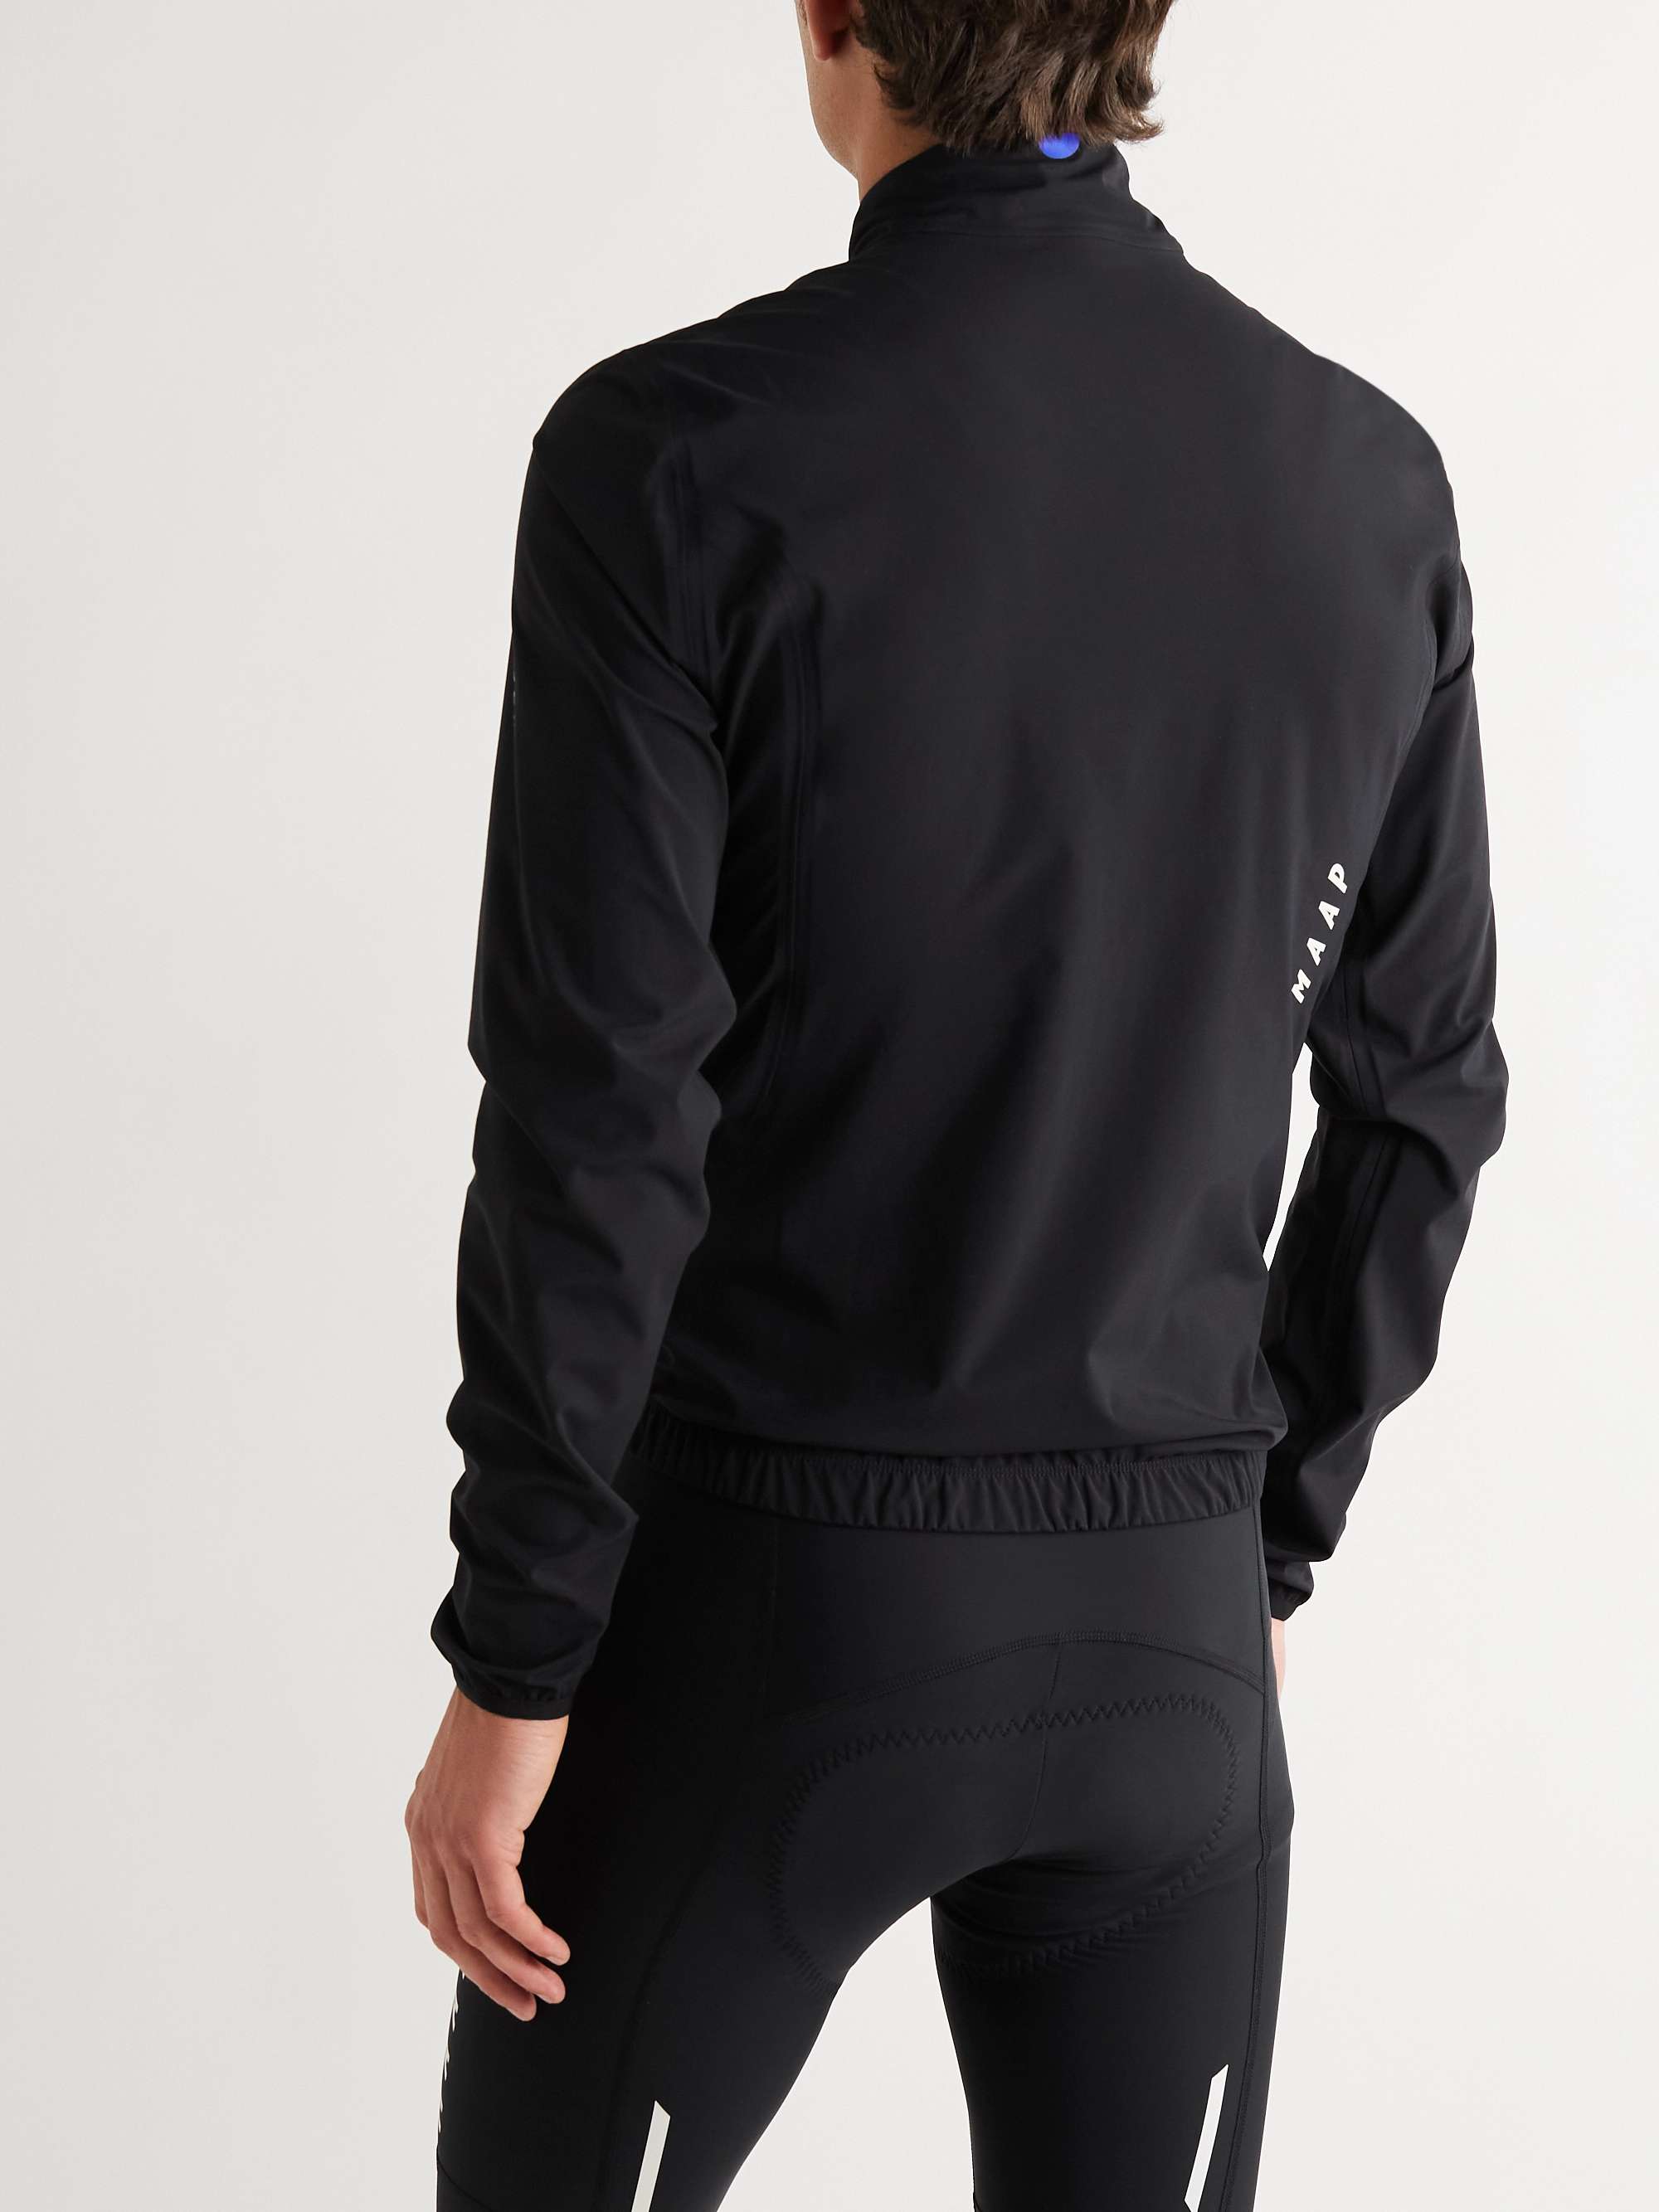 MAAP Prime Stow Shell Cycling Jacket